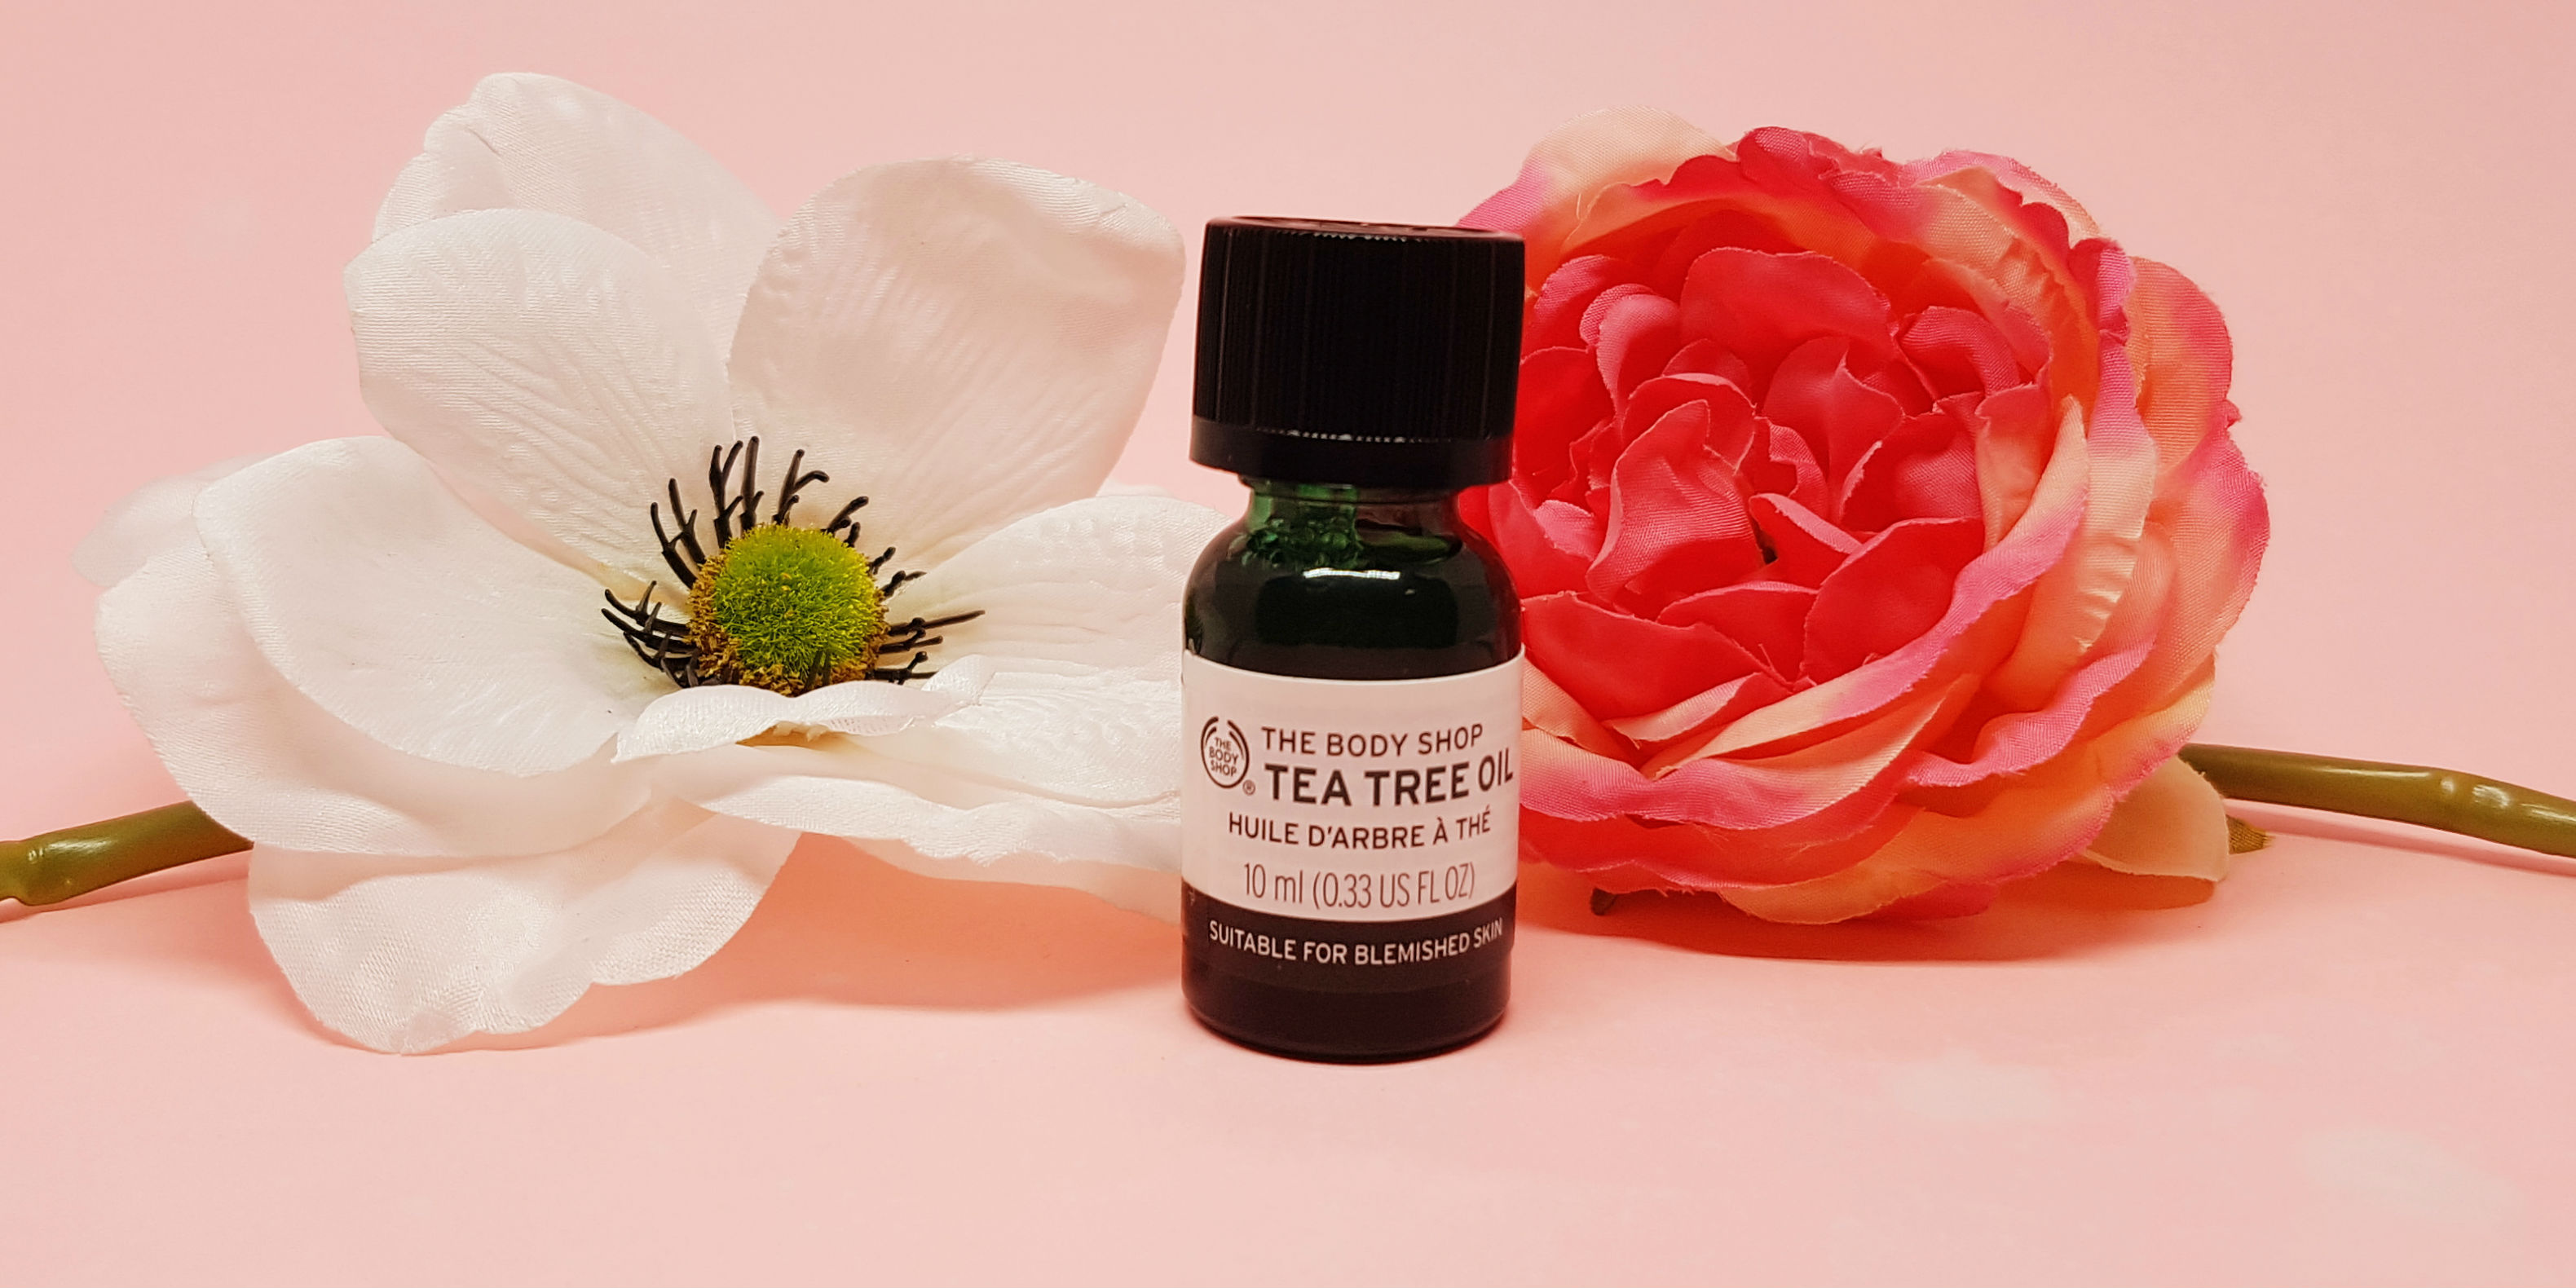 The Body Shop Tea Tree Oil Review Style Vanity